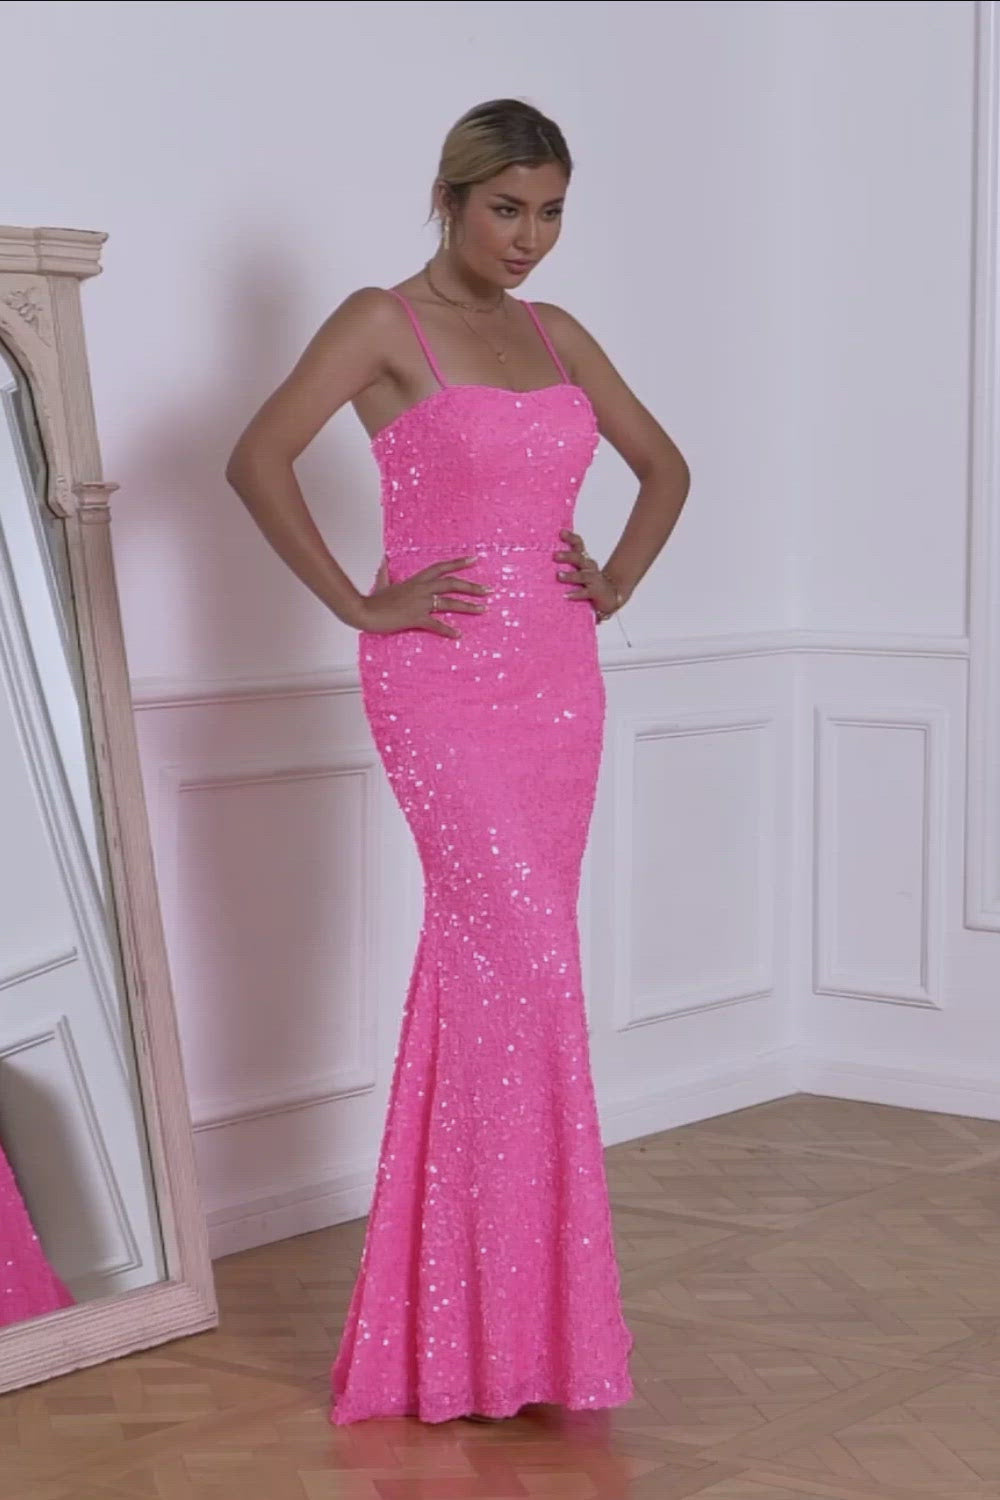 Viniodress Shimmering Pink Sequin Mermaid Prom Dress with Spaghetti Straps and High Slit FD3461 Custom Colors / US2